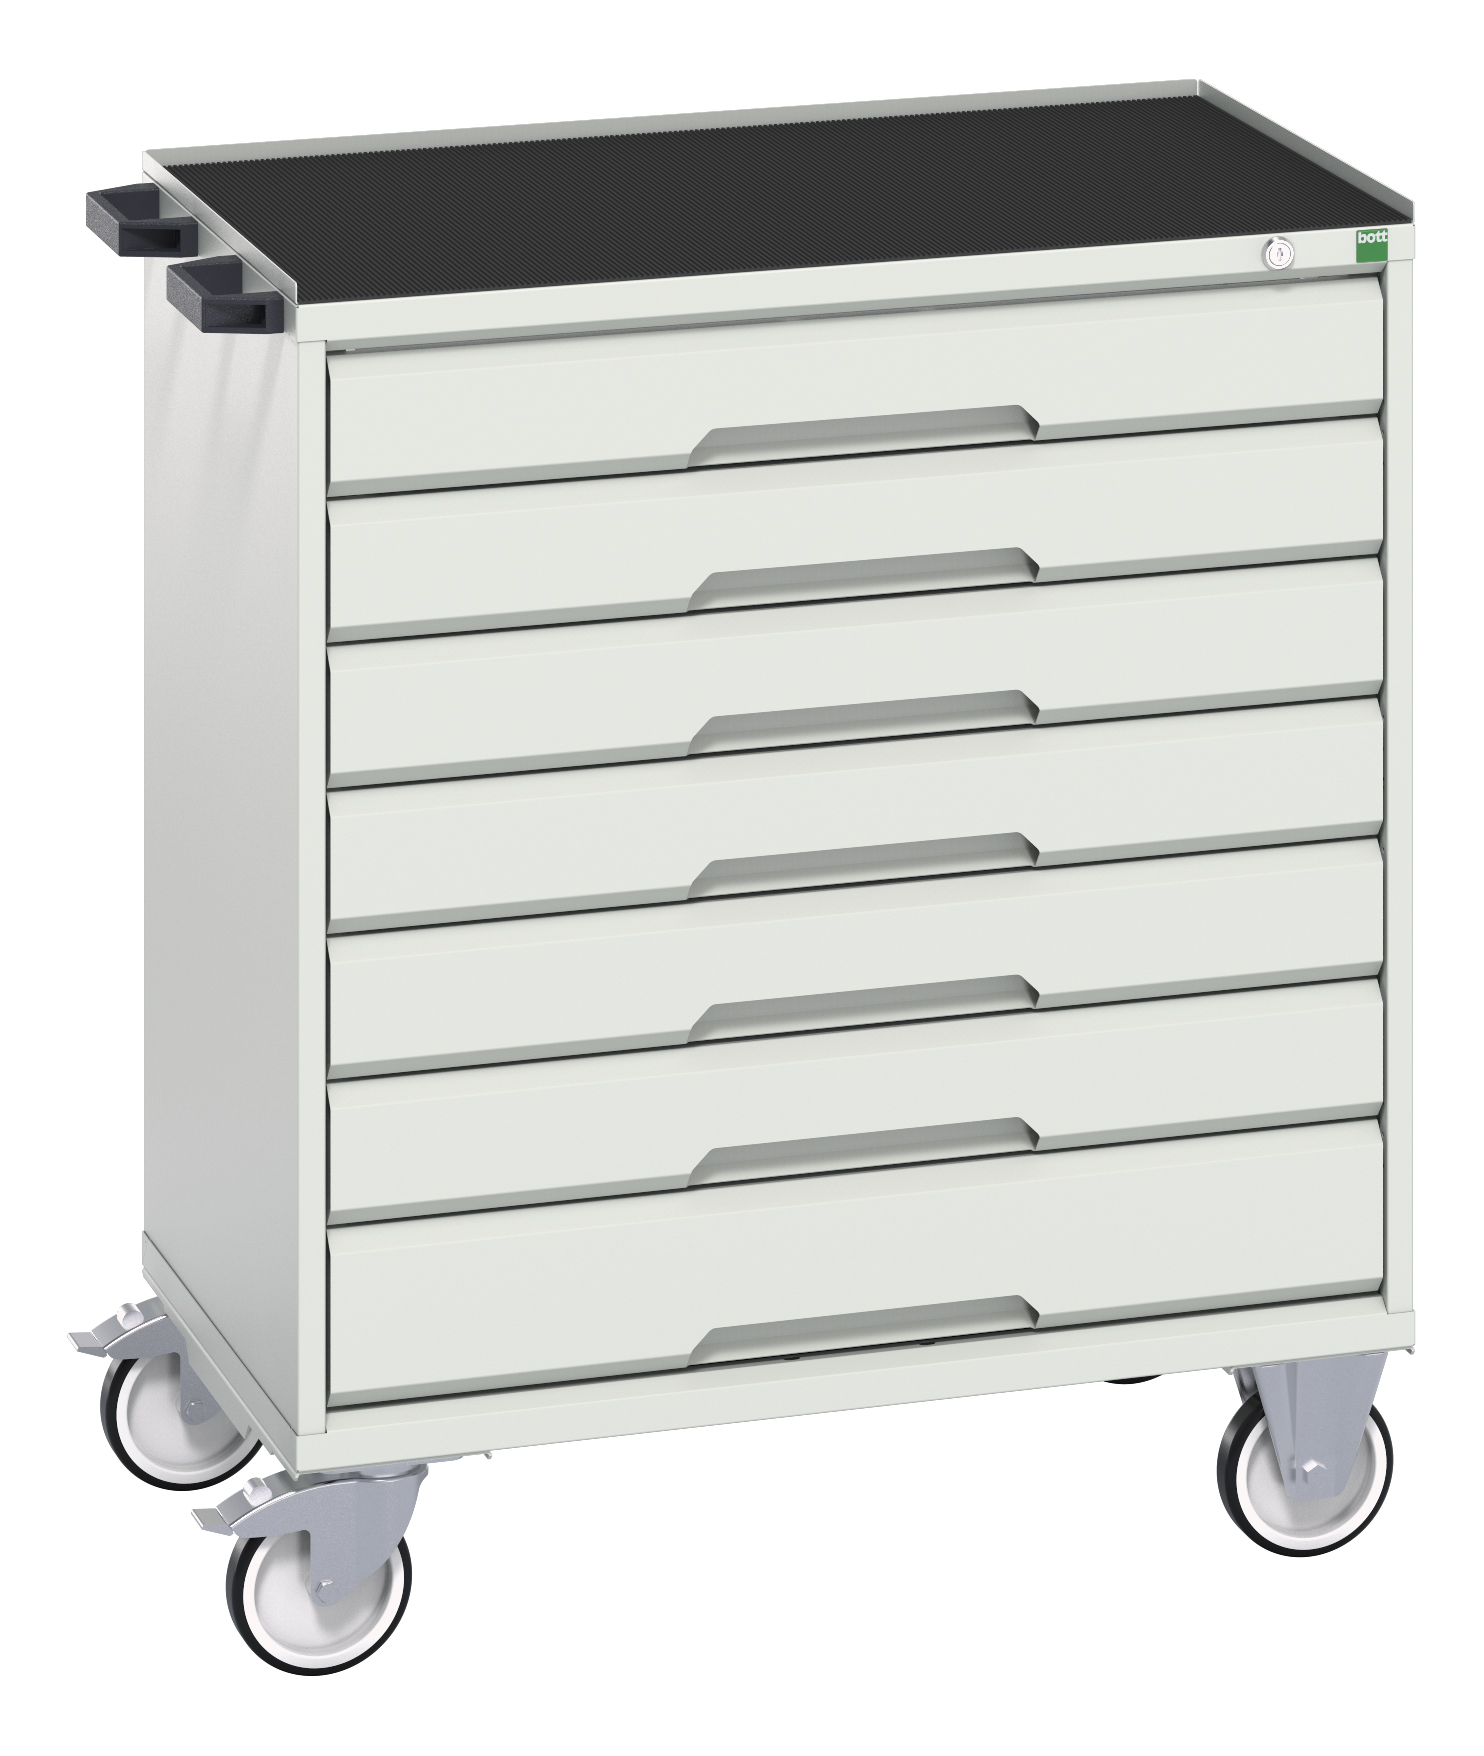 Bott Verso Mobile Drawer Cabinet With 7 Drawers & Top Tray With Mat - 16927008.16